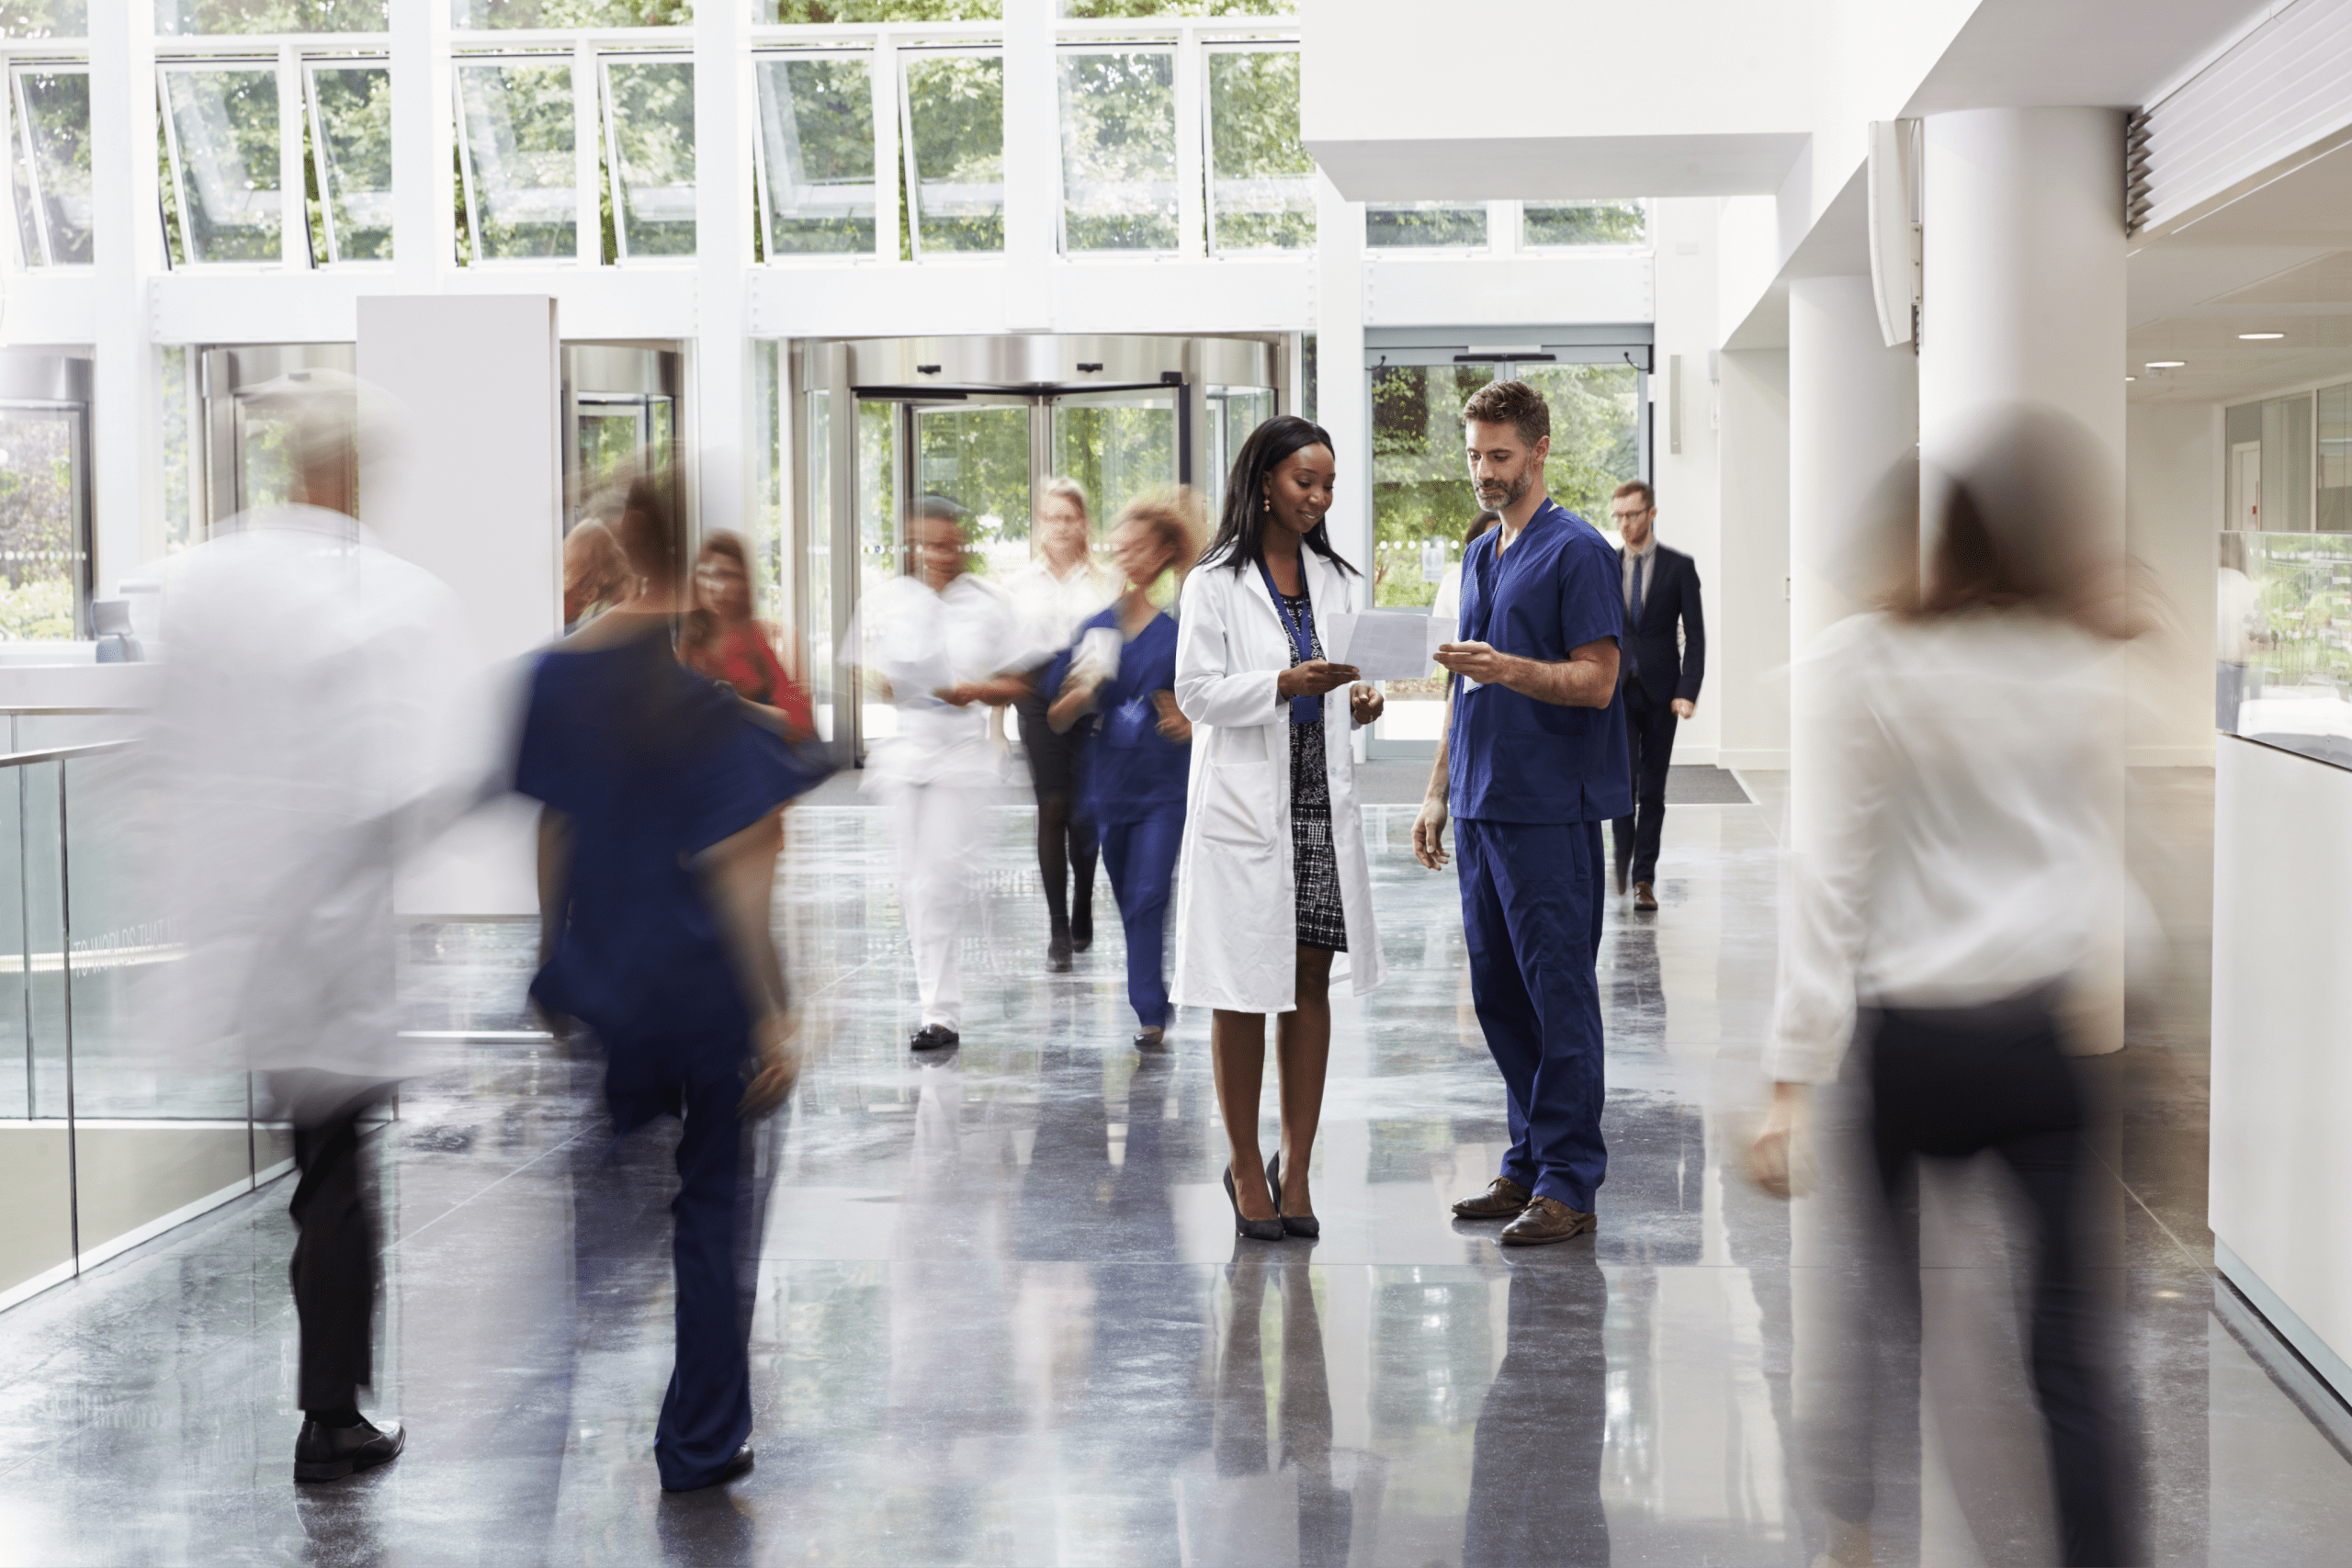 Personnel in the lobby of a busy hospital